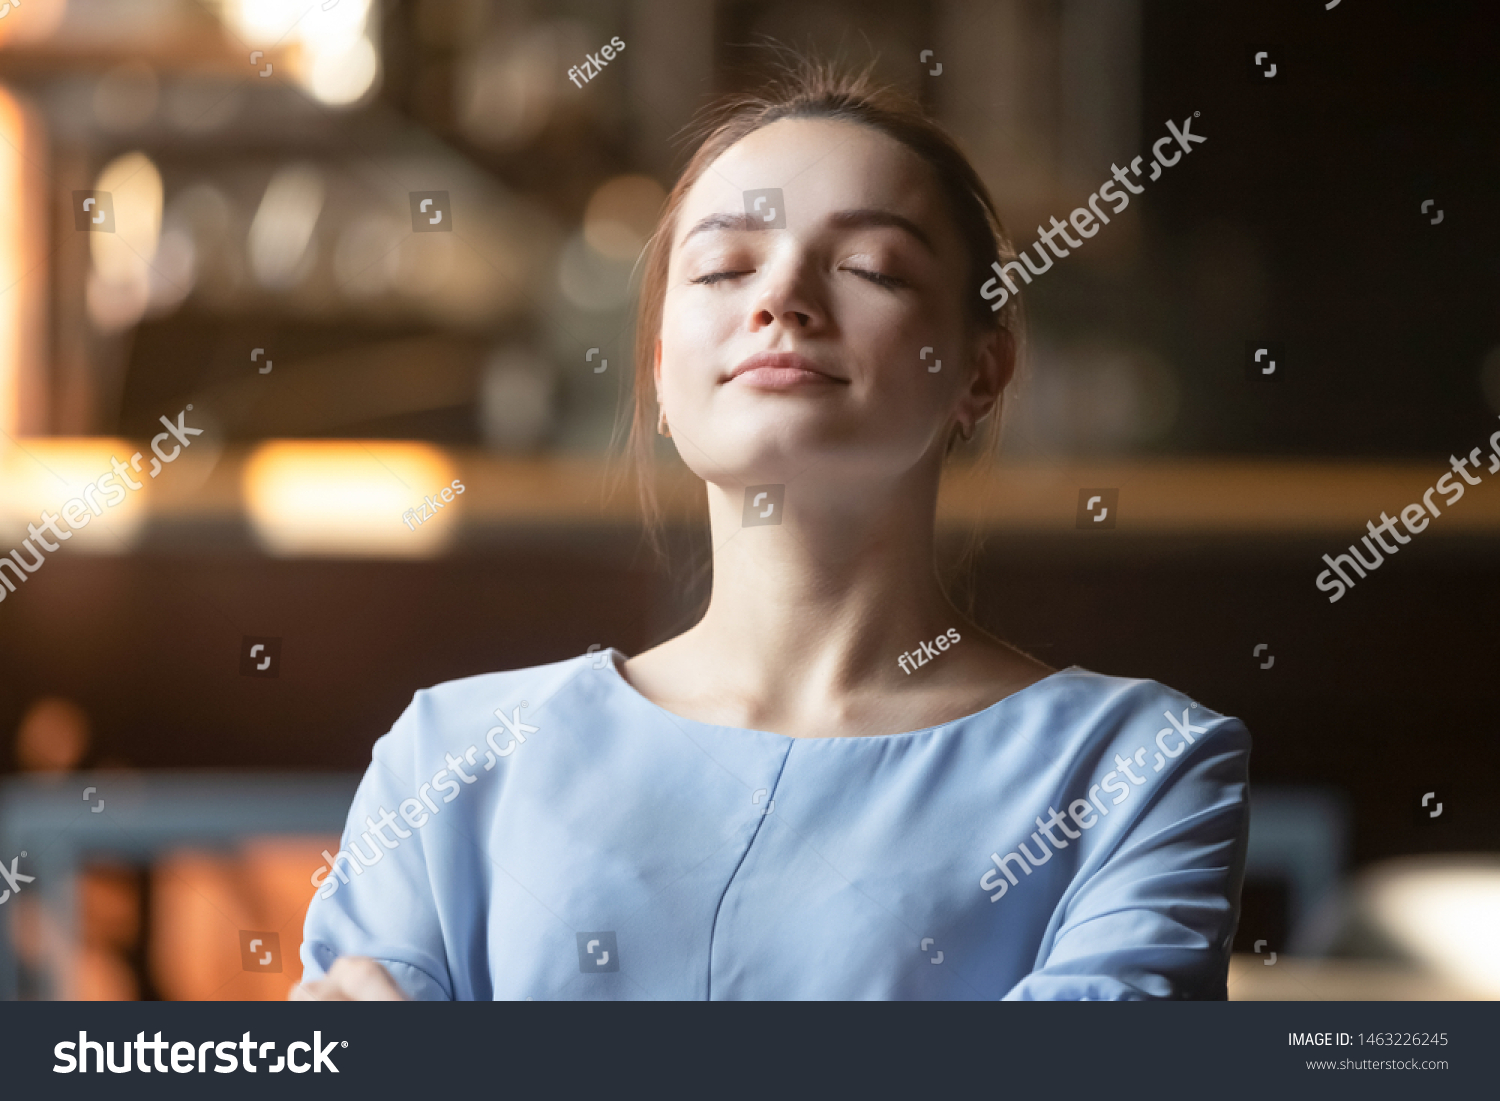 Close up of peaceful young woman relax lean back sitting with eyes closed dreaming or visualizing, happy calm female dreamer rest meditating controlling emotions. Stress free, mindfulness concept #1463226245